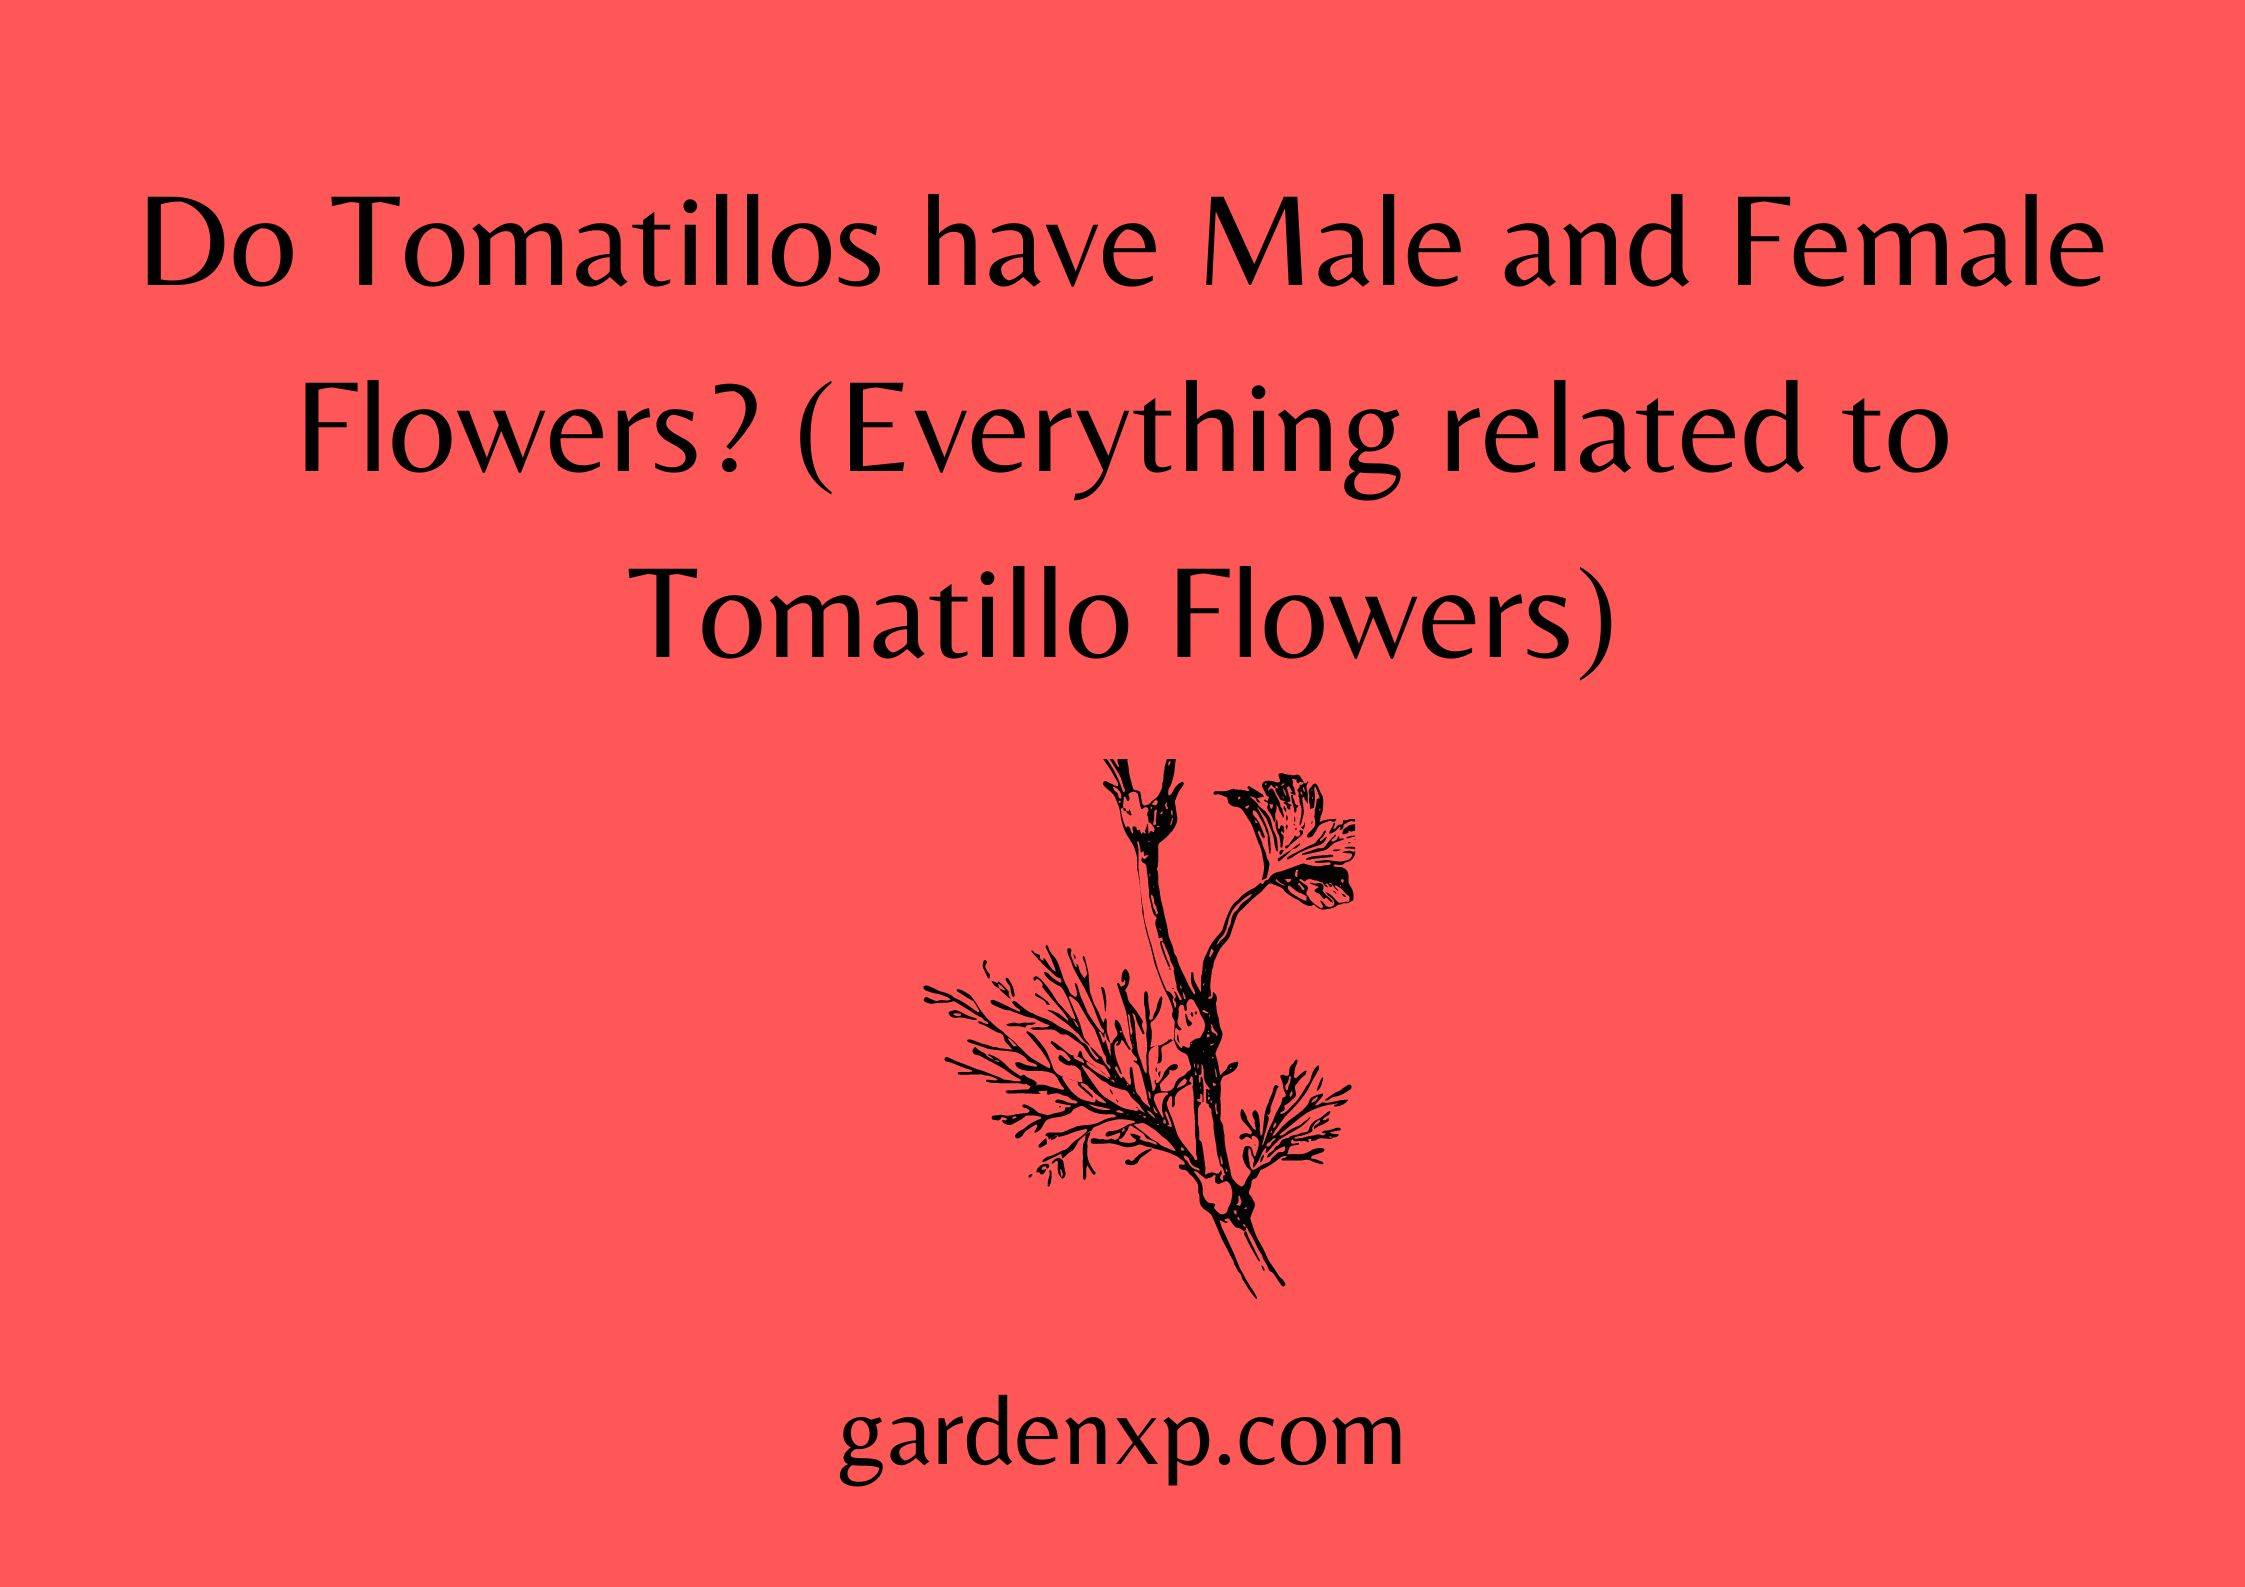 Do Tomatillos have Male and Female Flowers? (Everything related to Tomatillo Flowers)